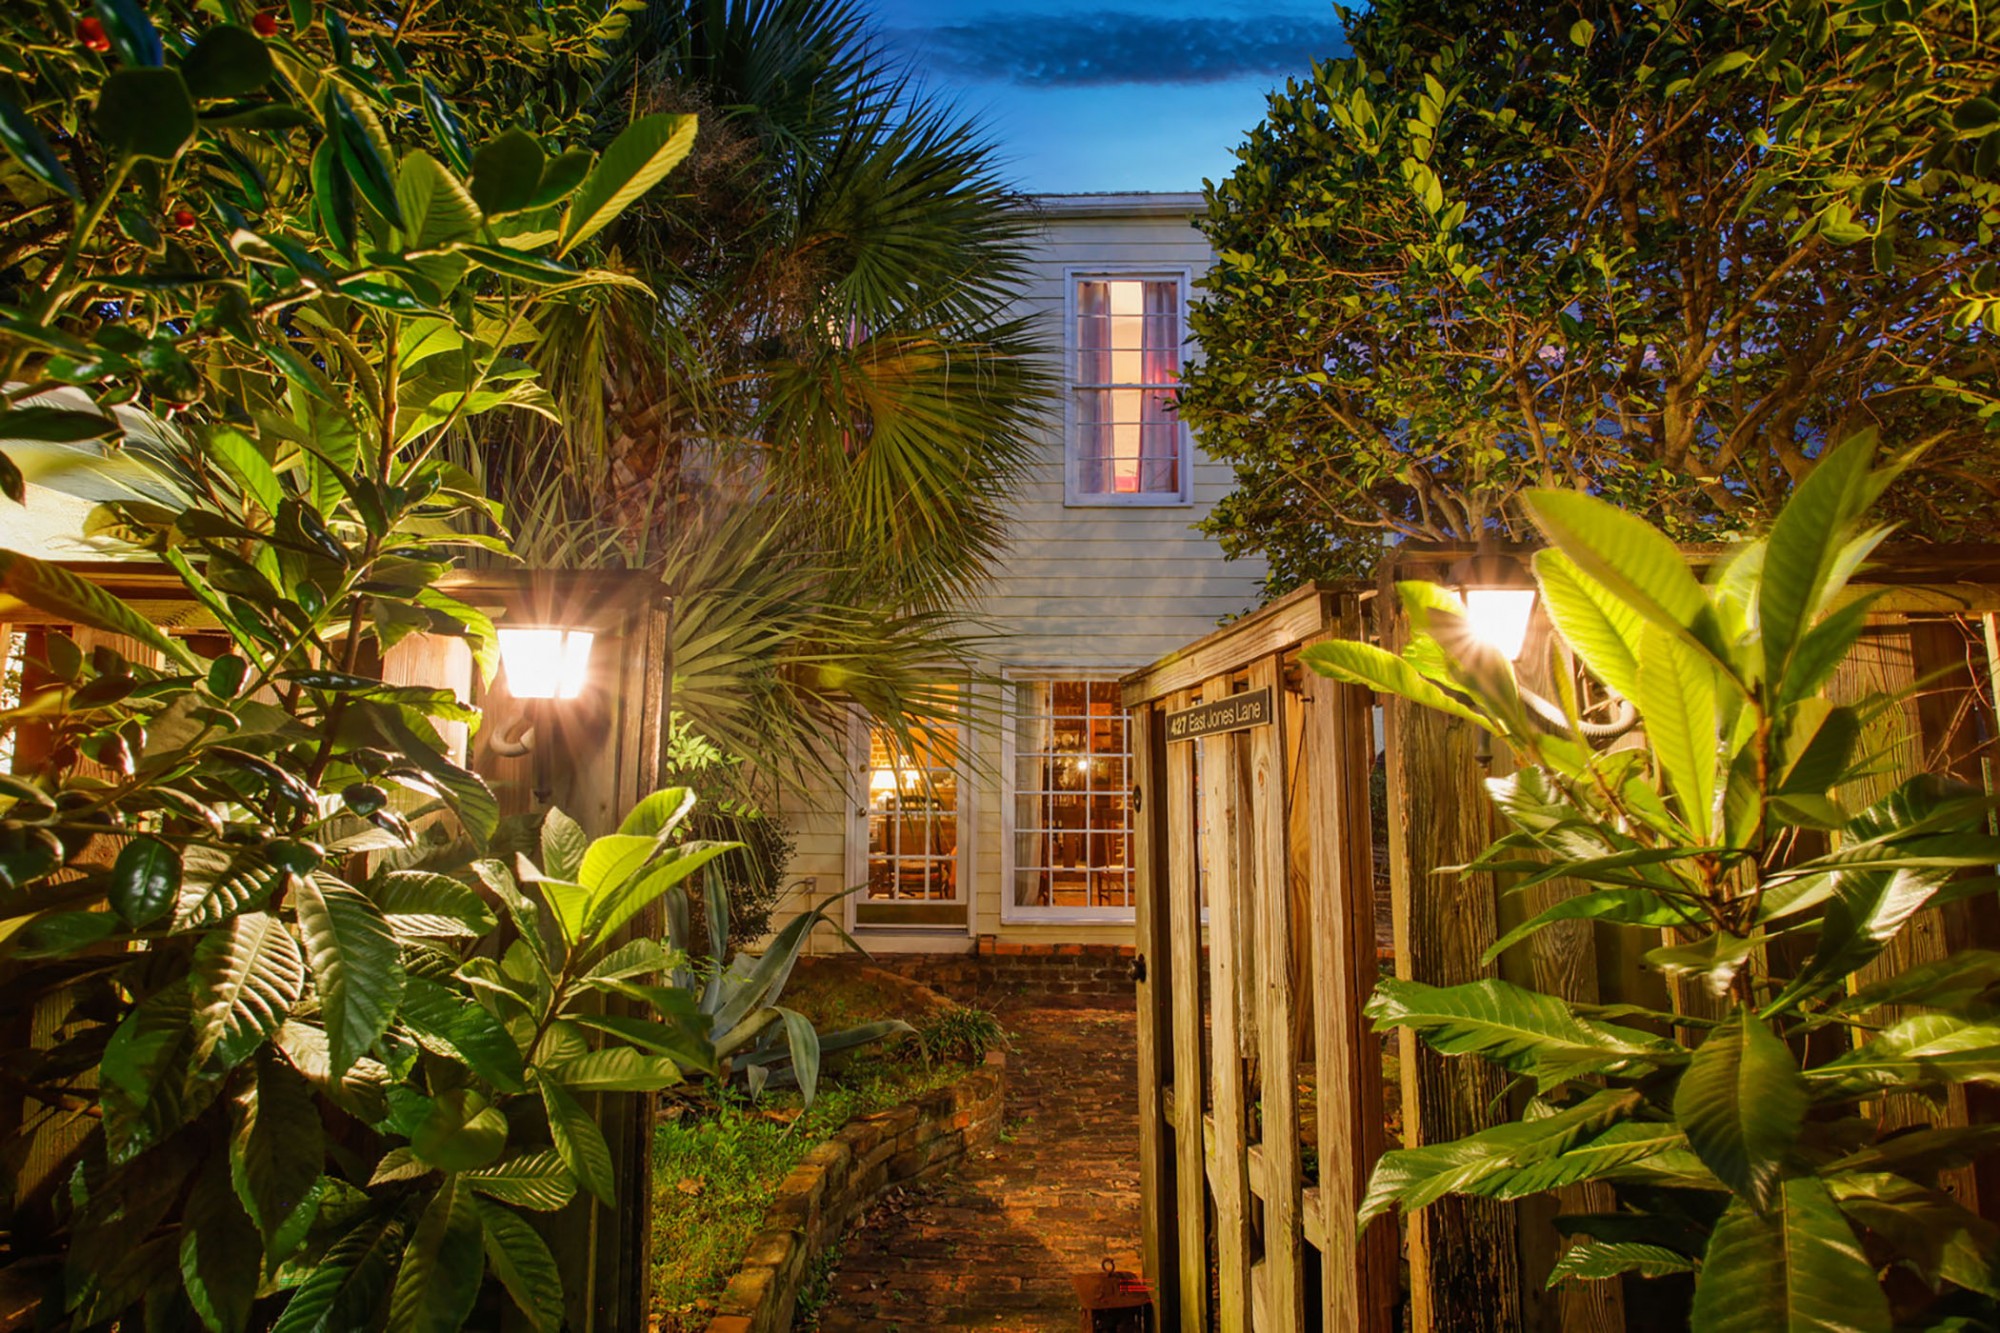 Enjoy a prime location and everything Historic Downtown Savannah has to offer in this one-of-a-kind home.